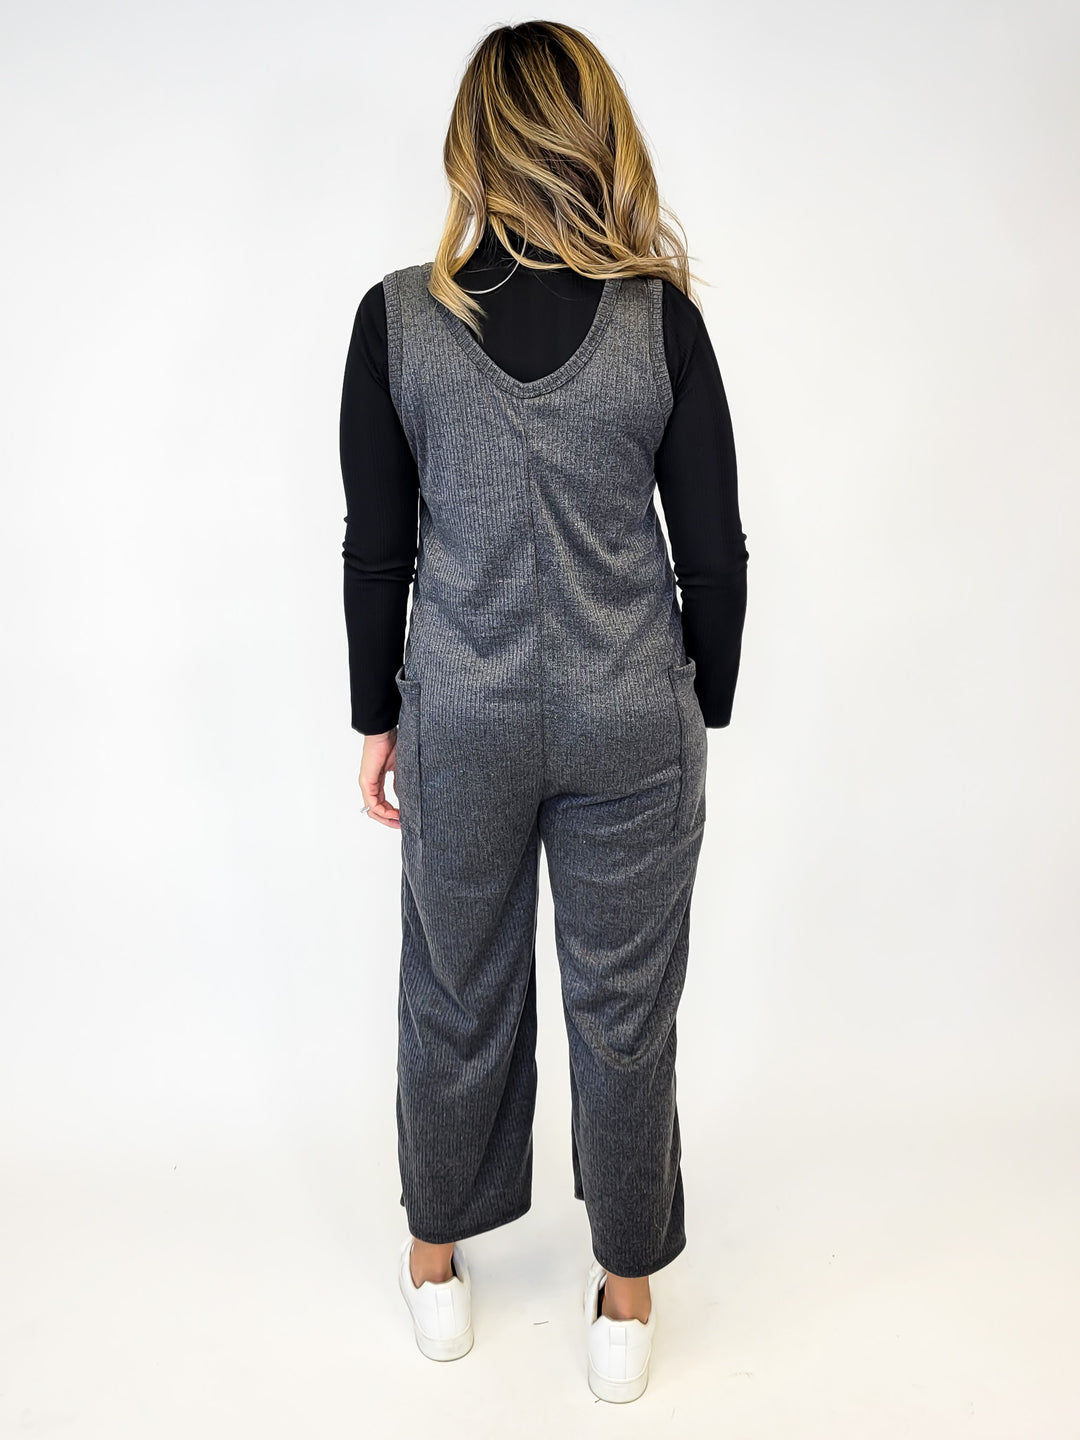 RIBBED FLOWY SLEEVELESS JUMPSUIT - CHARCOAL